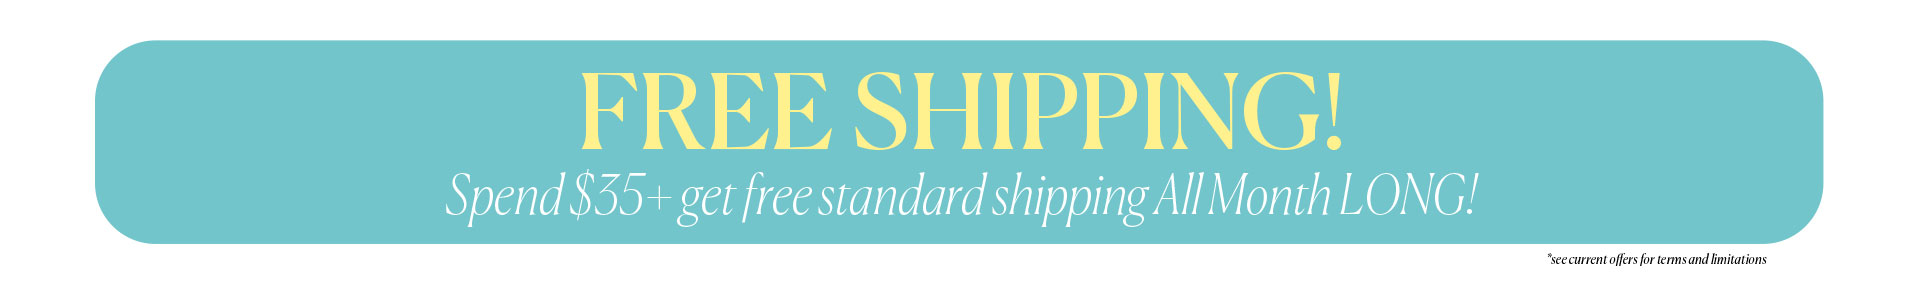 Free Shipping - Spend $35+ and get free standard shipping ALL MONTH LONG!